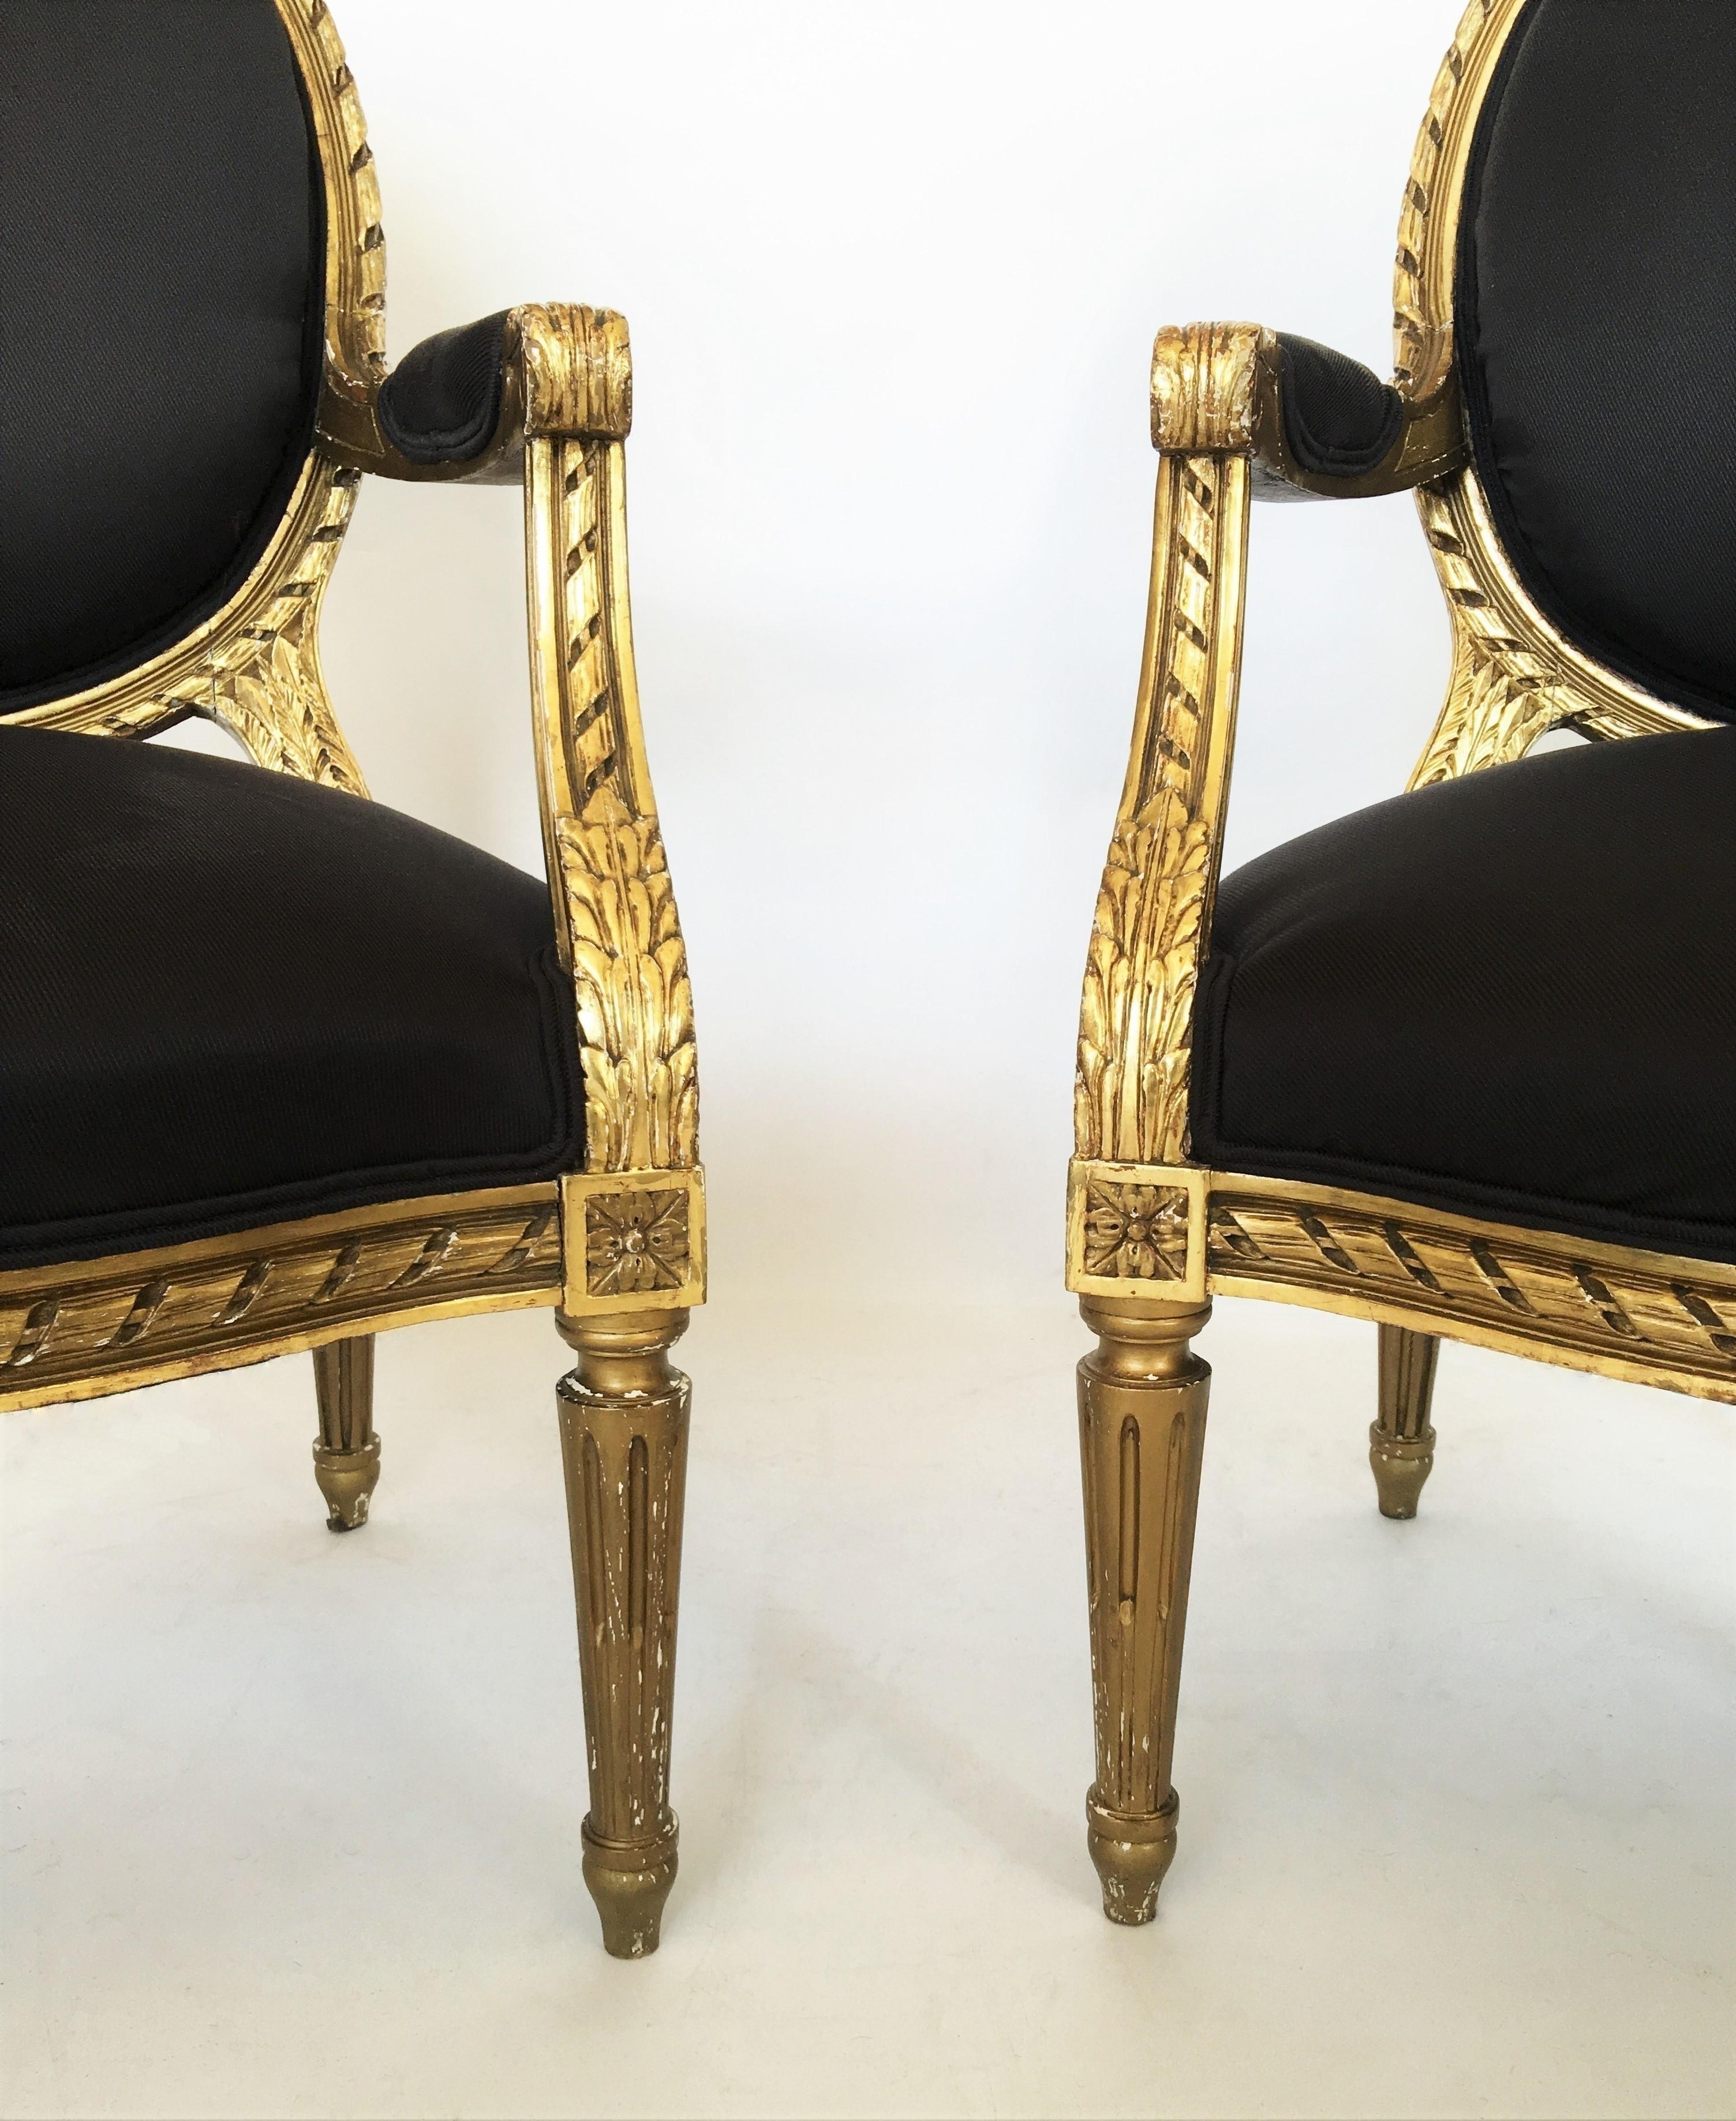 19th Century French Louis XVI Style Giltwood Fauteuils, Pair For Sale 6